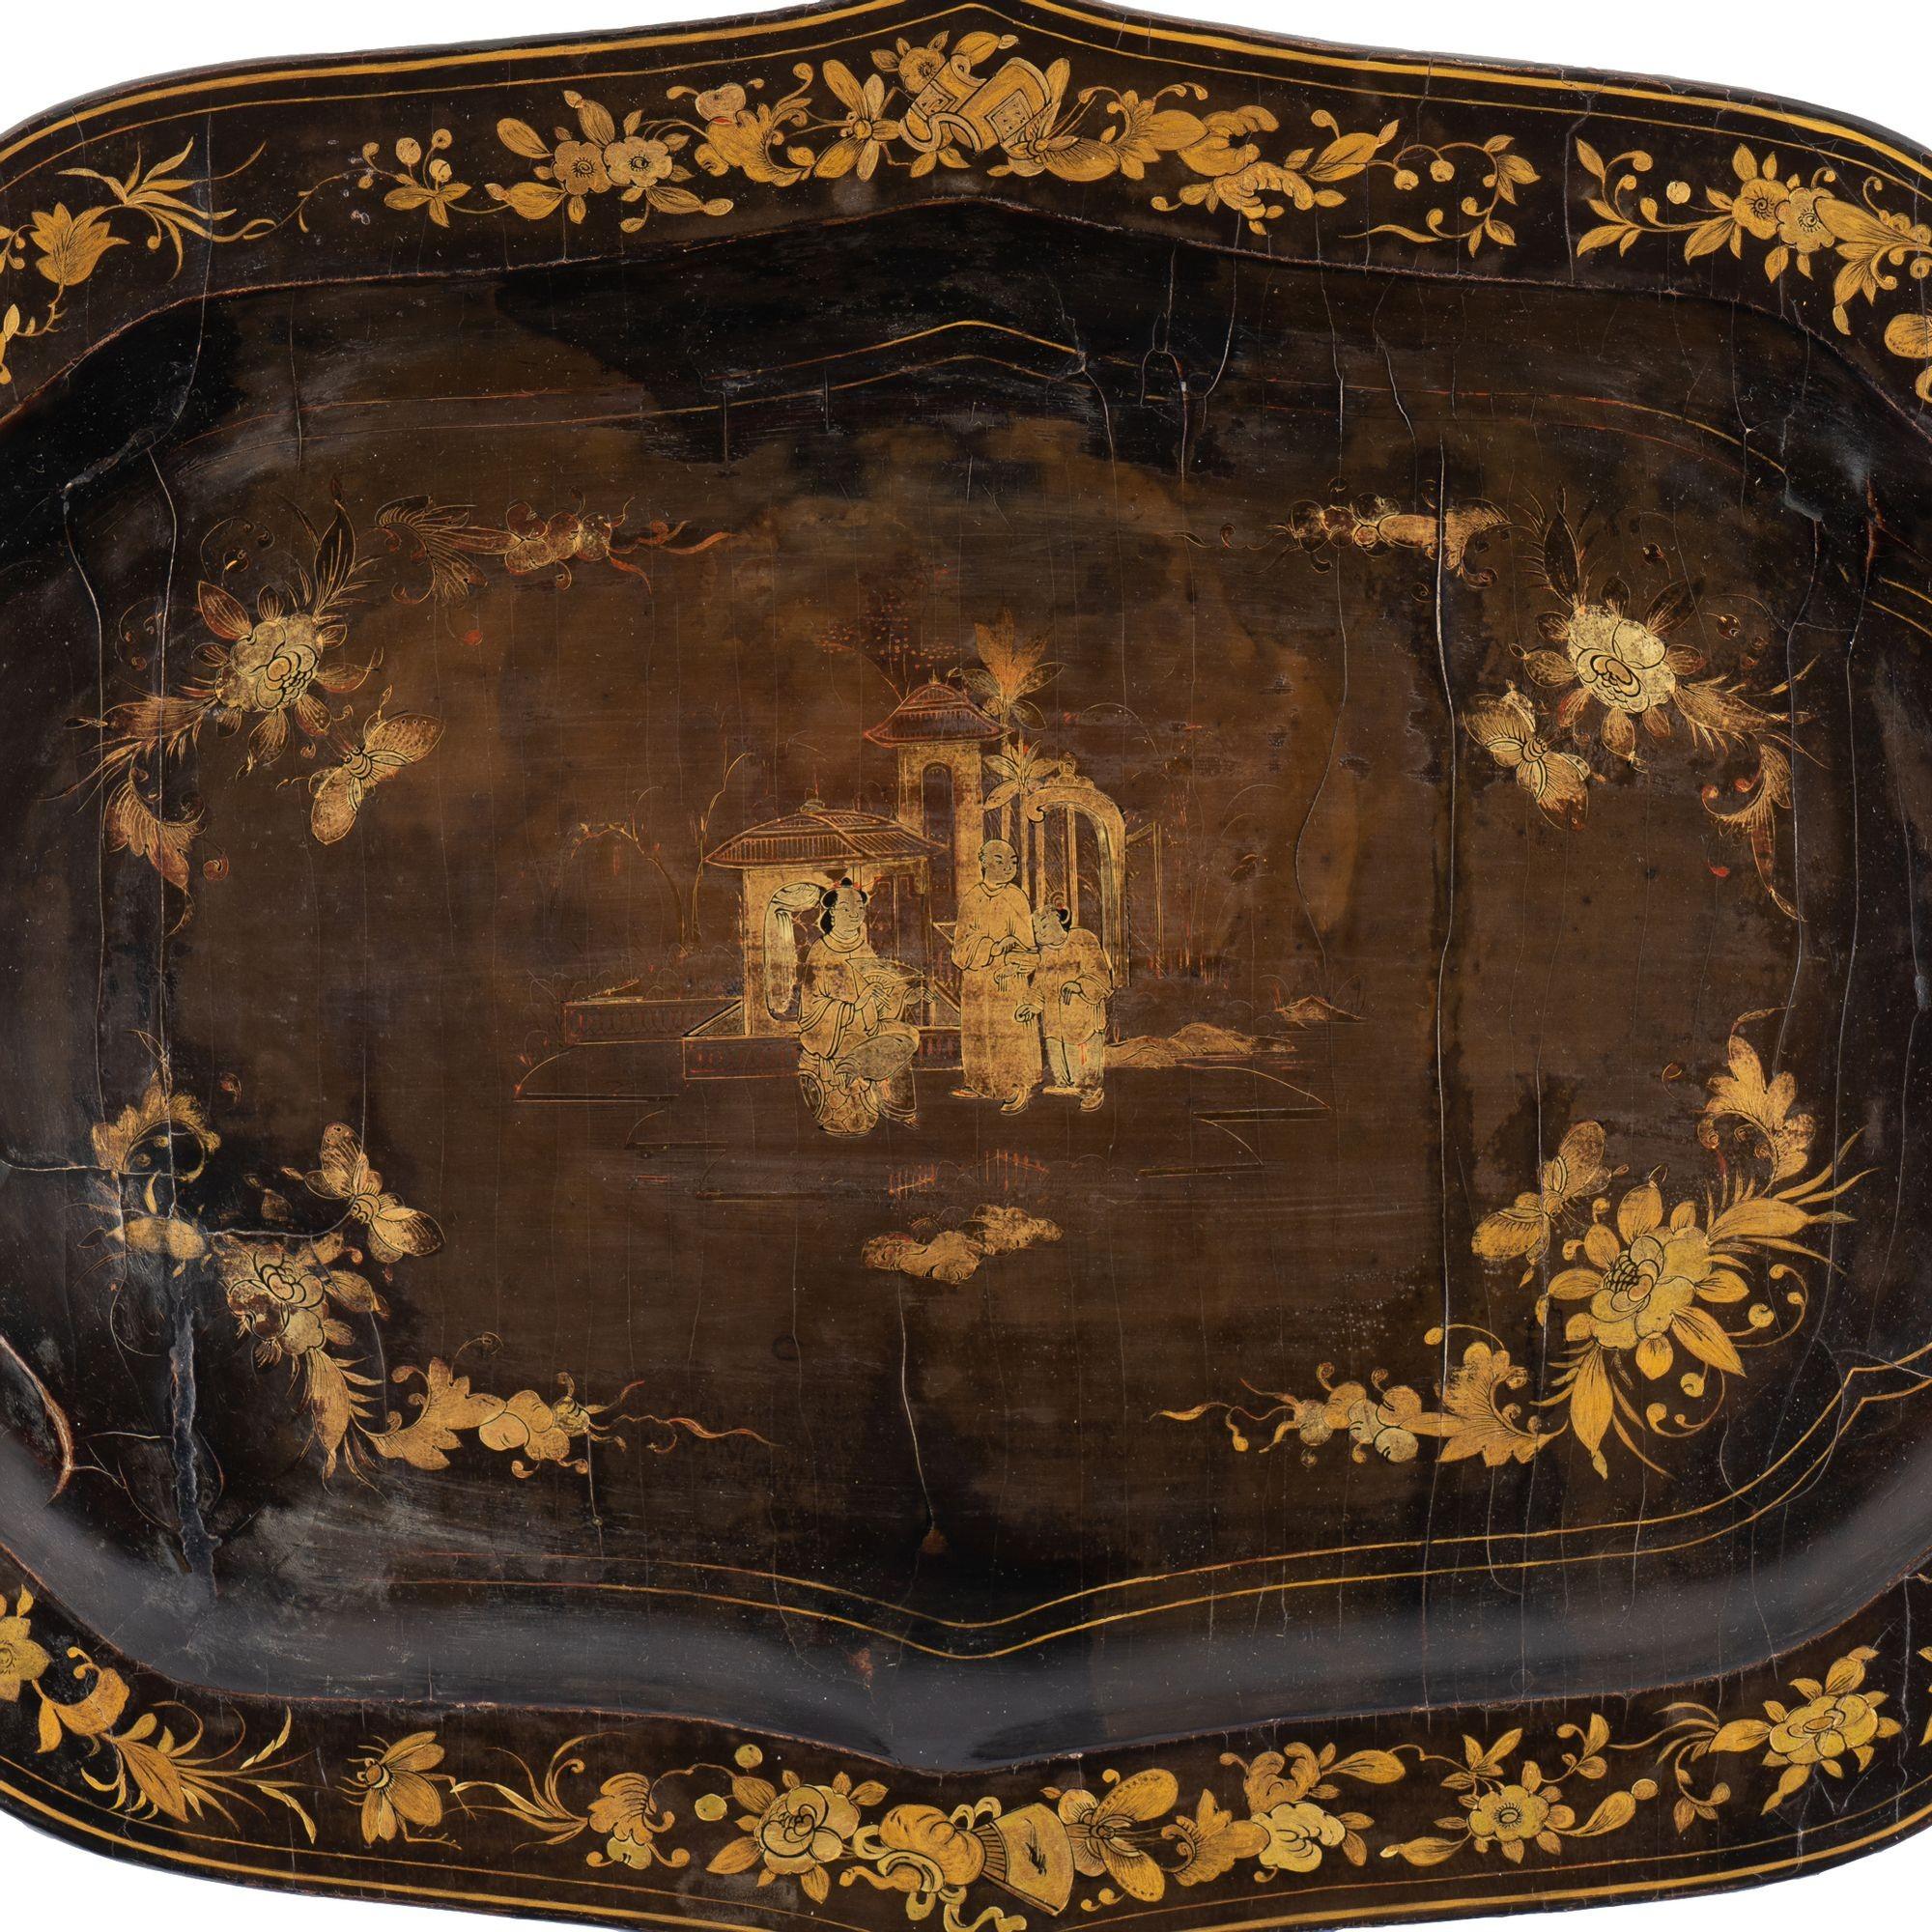 Shaped black lacquer wood tray with gilt decoration. At the center of the design, three figures, one seated and two standing, are positioned in front of two small structures in a garden setting. A repeating and largely symmetrical floral design